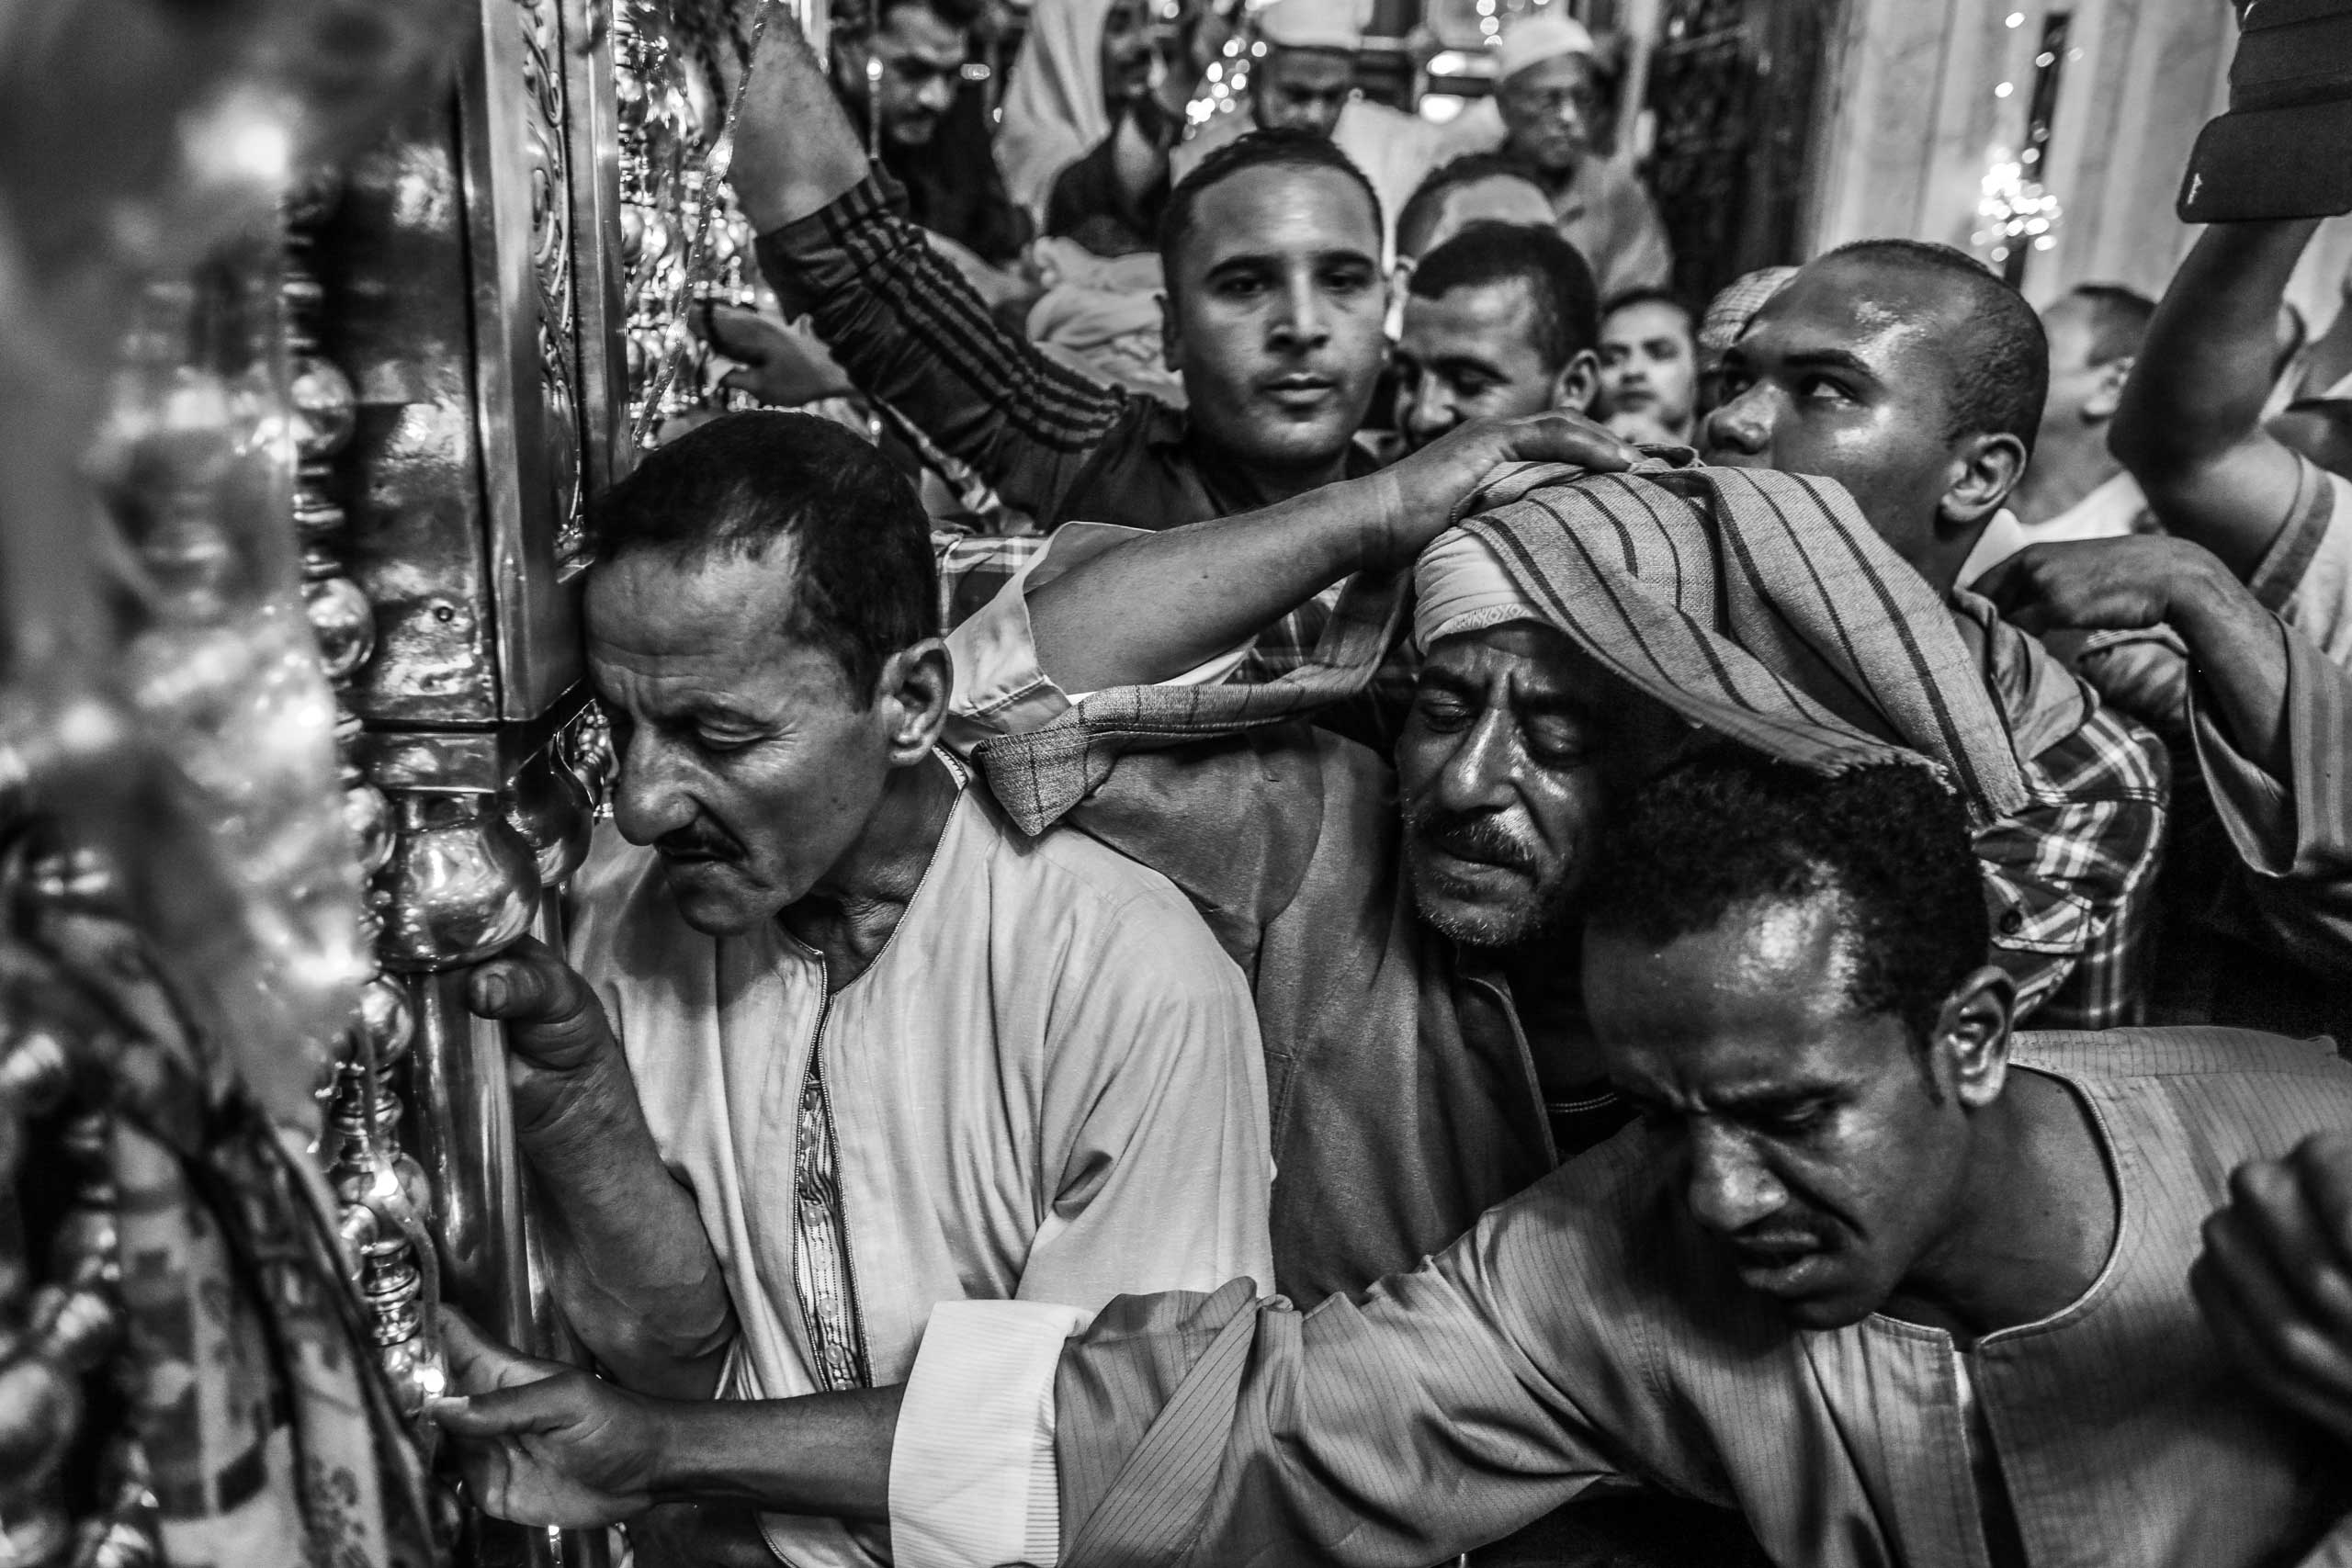 Worshippers surround the shrine of Sayeda Zeinab, granddaughter of the Prophet Muhammad, during the celebration of her birthday. Holding the shrine becomes the main goal for the thousands of attendees who then recite prayers or seek blessings through it. Downtown Cairo, Egypt. May 20, 2014.